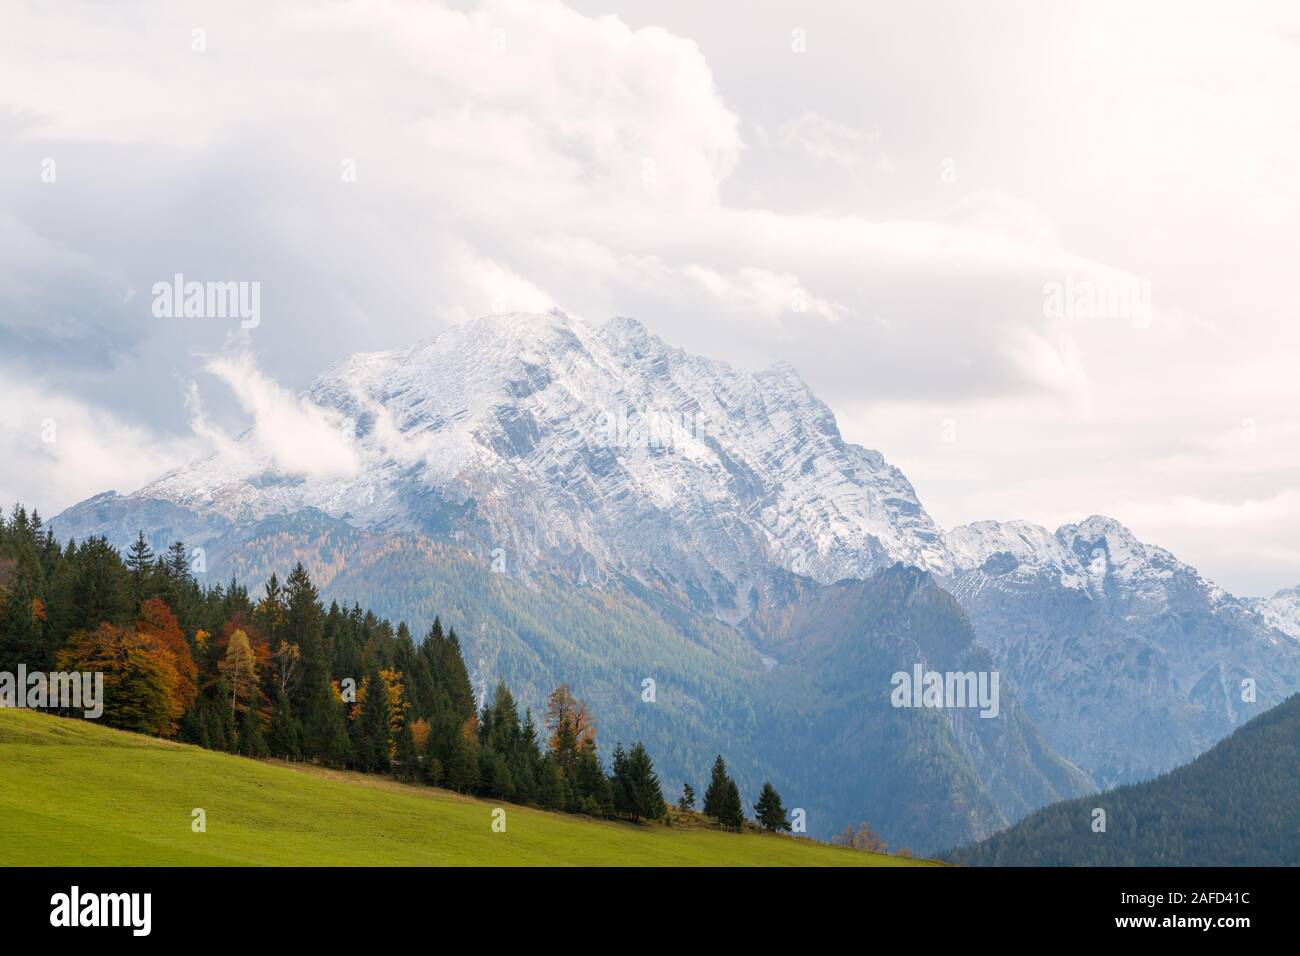 Typical mountains with autumn colors in the Bavaria Alps, Berchtesgaden National Park in Germany Stock Photo